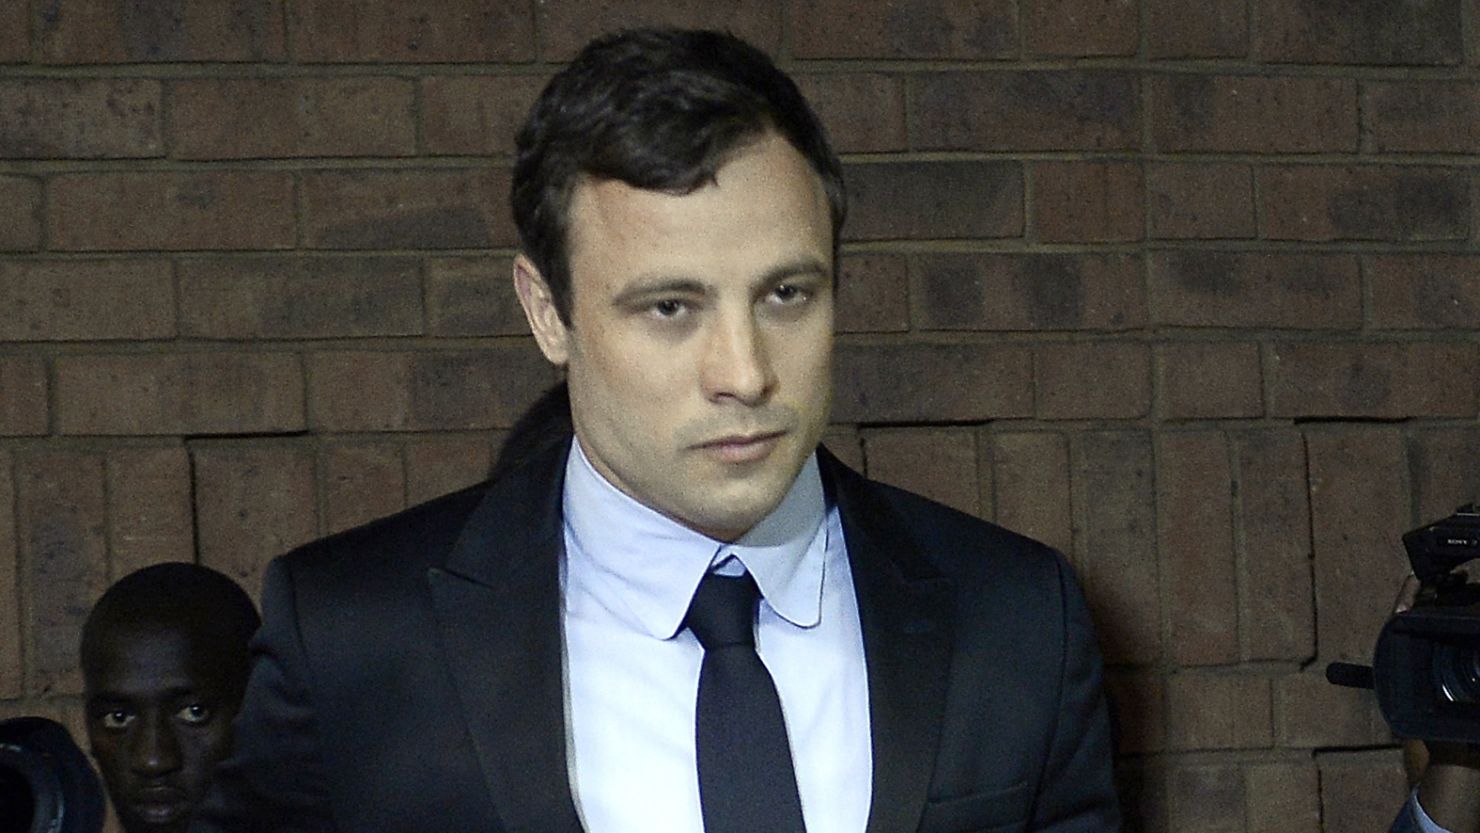 South African Olympic sprinter Oscar Pistorius arrives at the Magistrate Court in Pretoria on August 19, 2013.